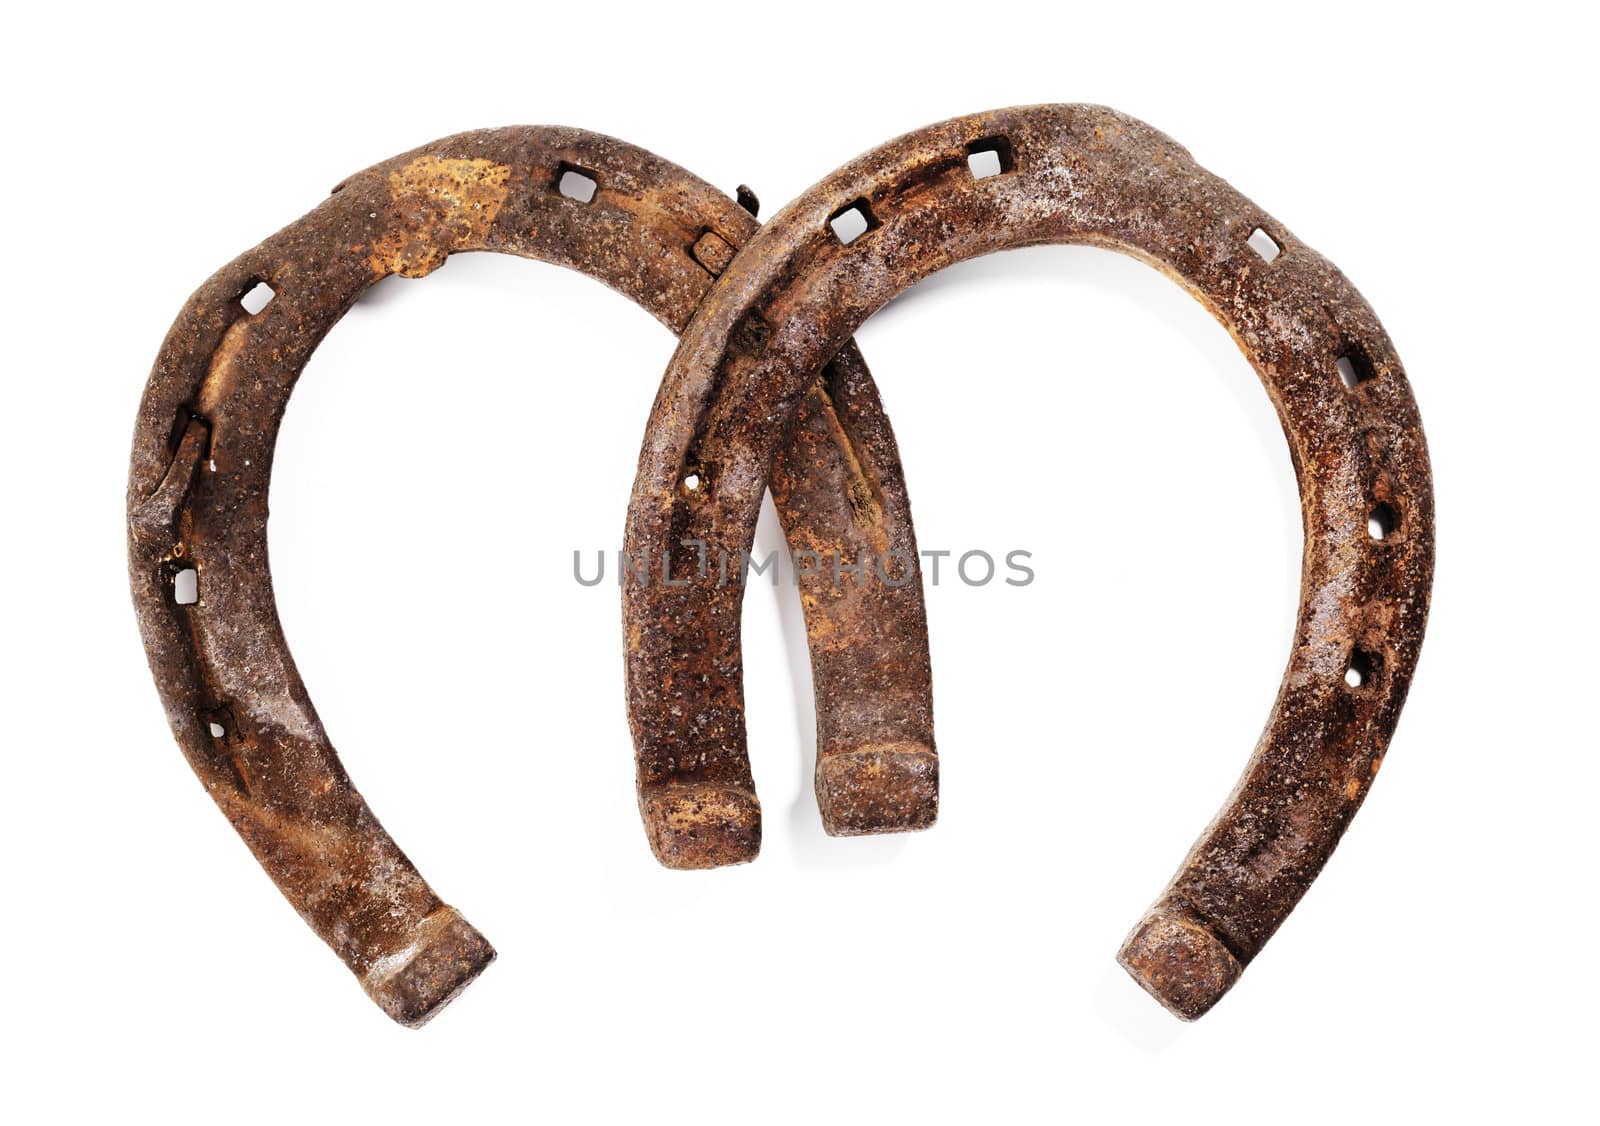 Old rusty and worn horseshoes isolated on white with natural shadows.